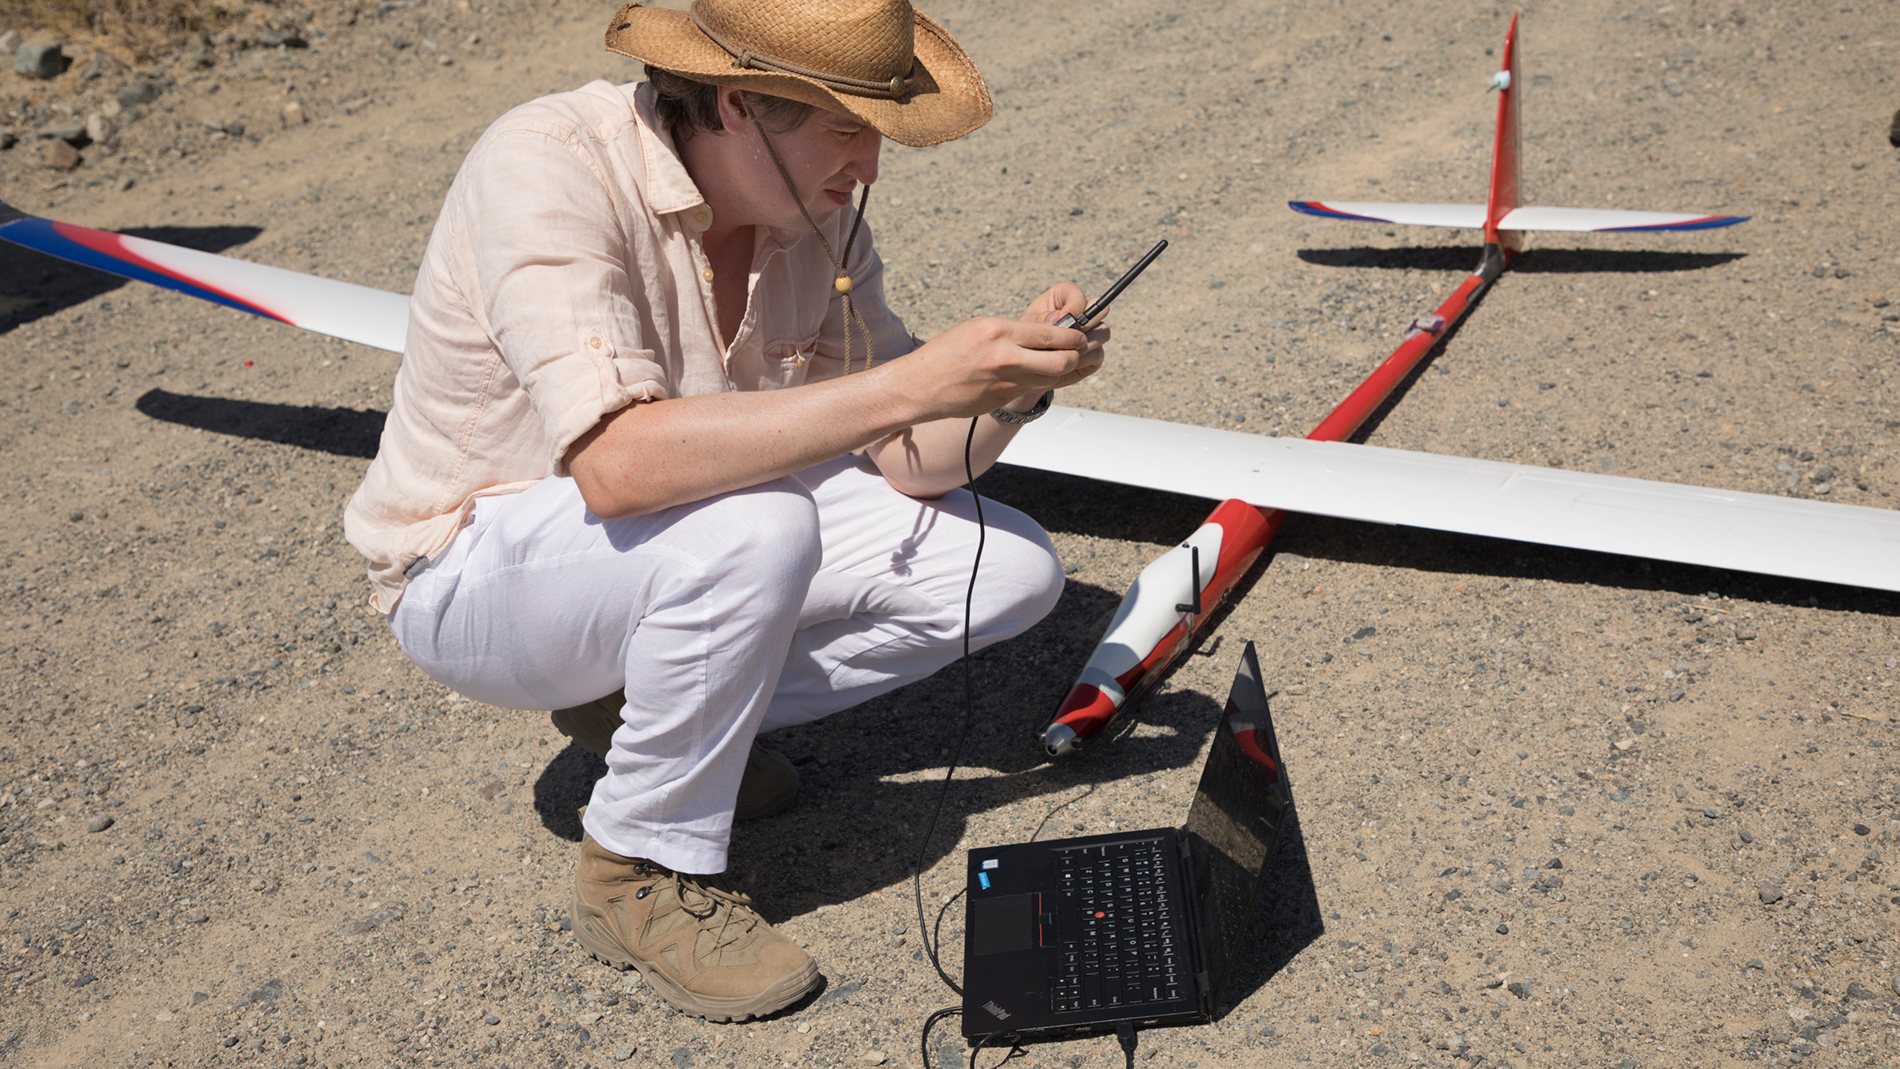 Borrowing A Clever Trick From Birds, This Smart Glider Could One Day Fly Forever Without A Motor